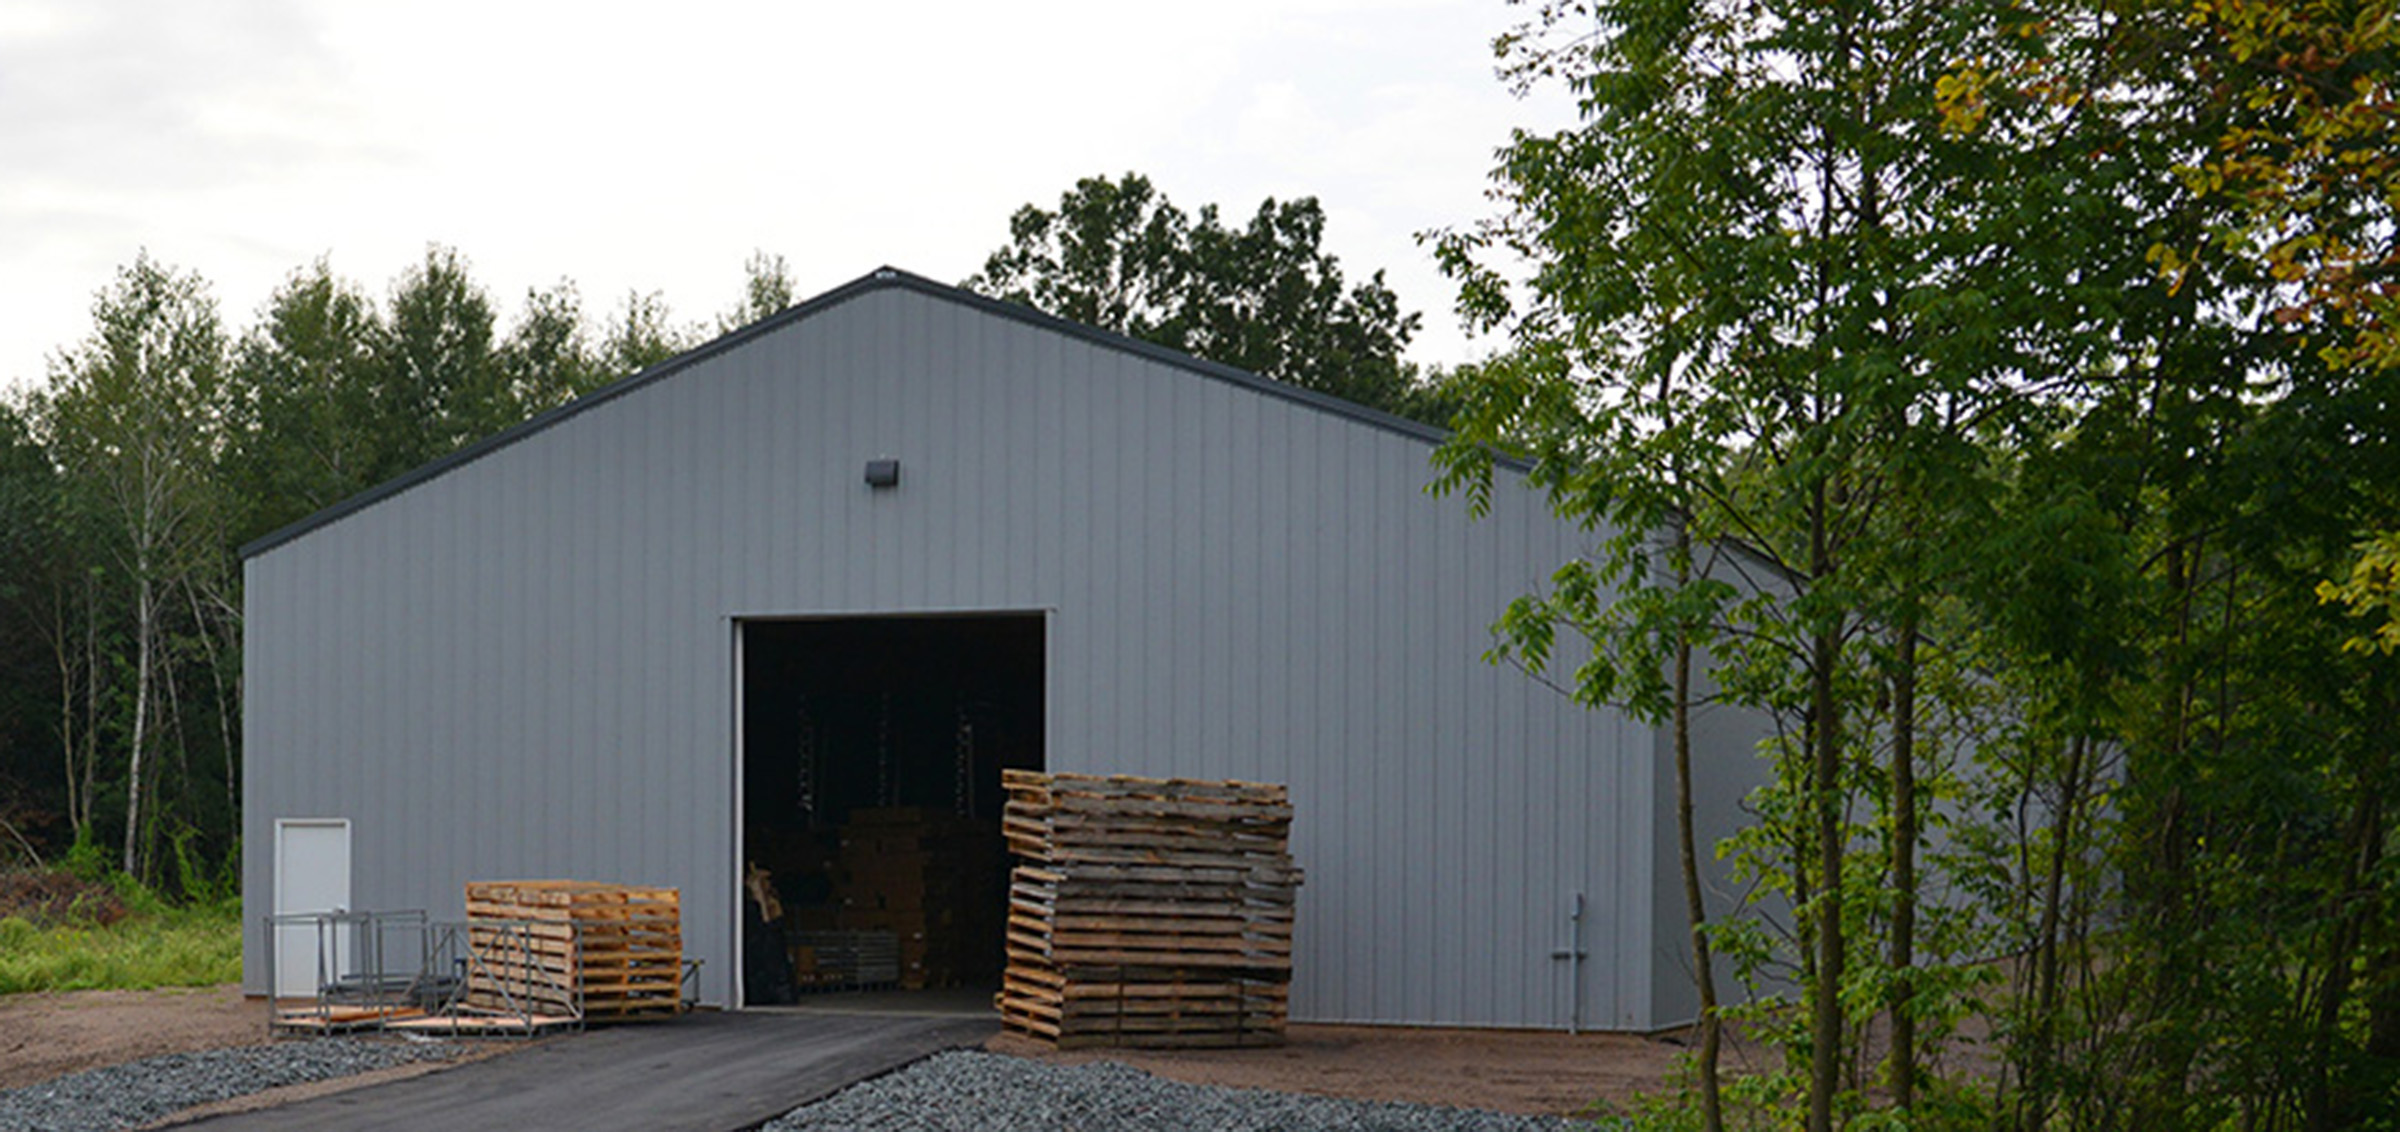 gray post frame commercial storage building with two stacks of wood palettes framing a garage door